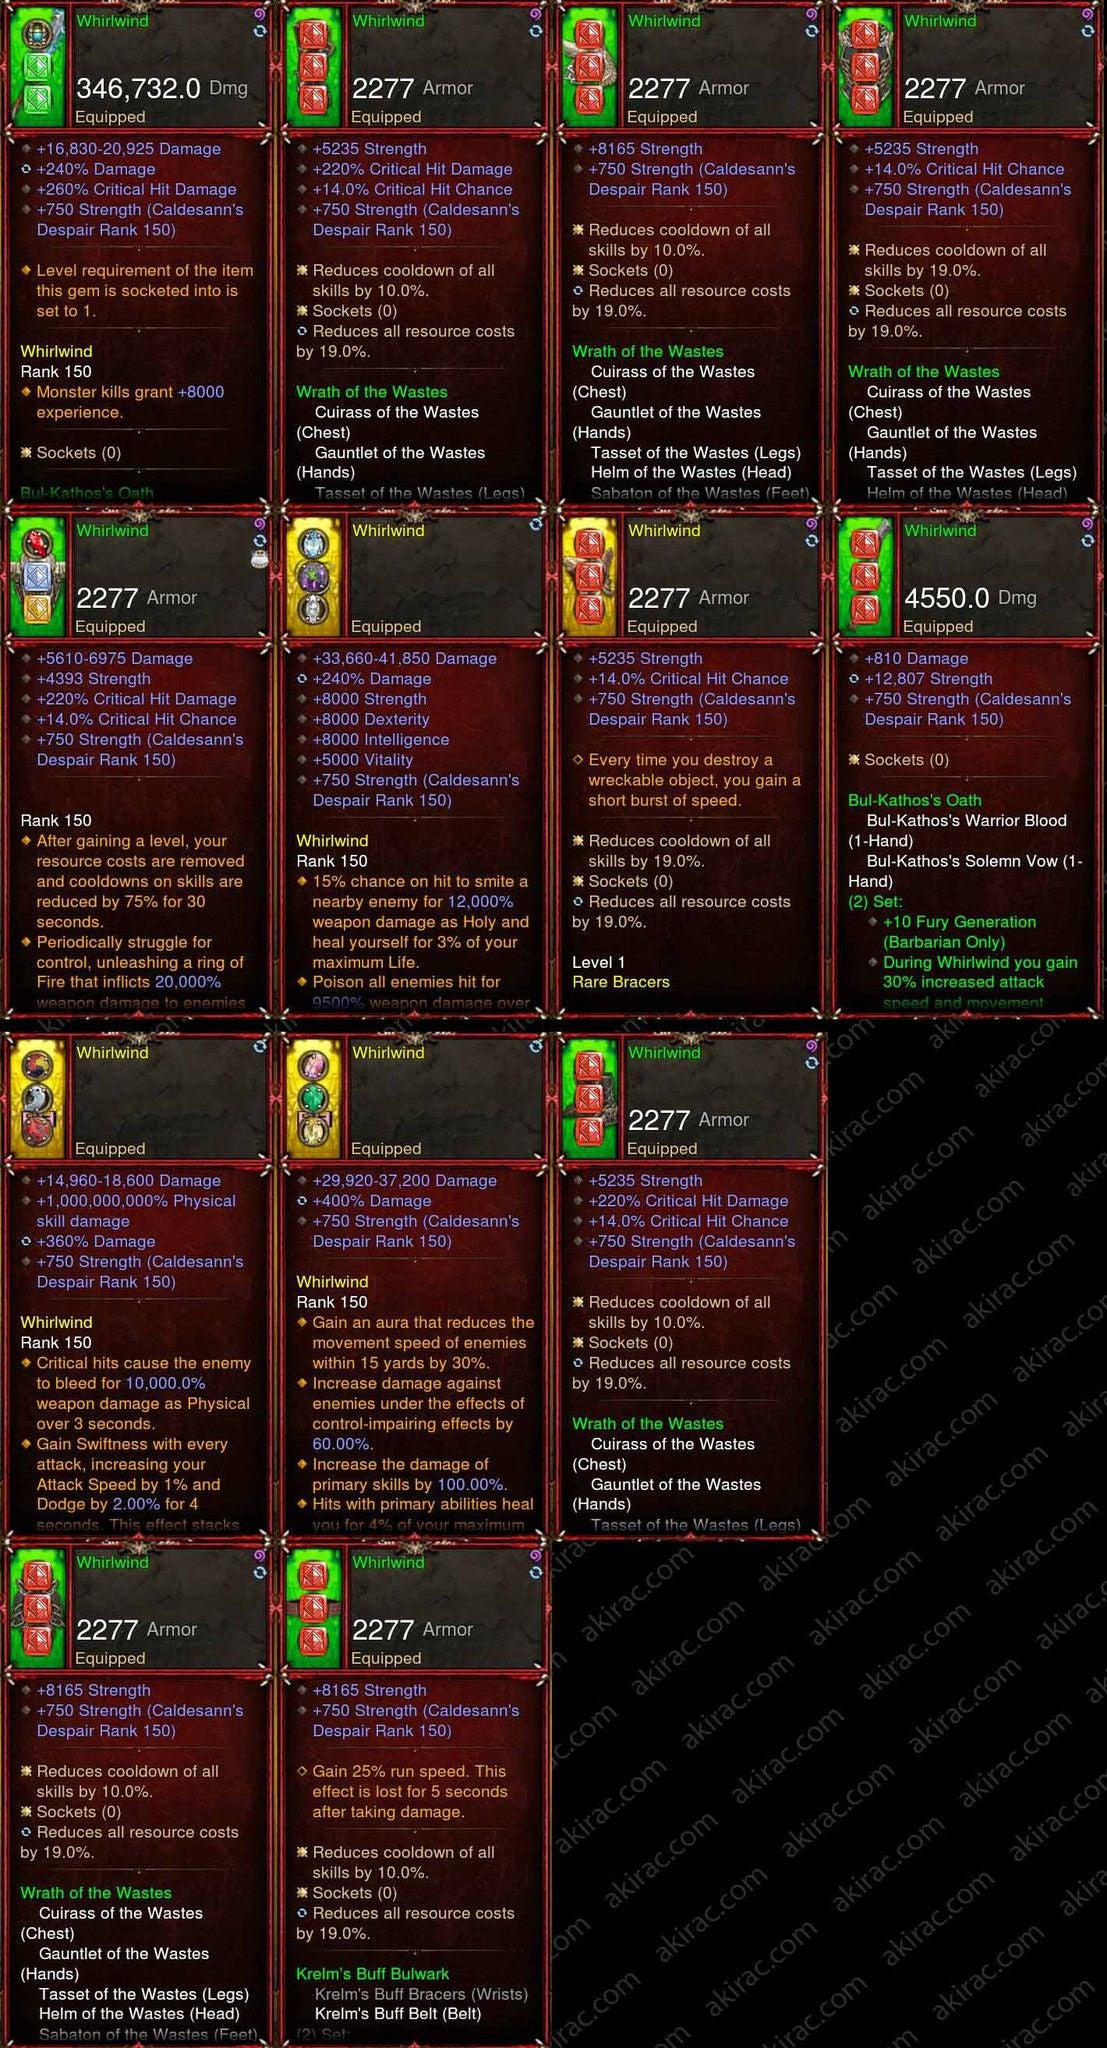 [Primal Ancient] Diablo 3 Immortal v3 Waste Barbarian Whirlwind Level 1-70 Diablo 3 Mods ROS Seasonal and Non Seasonal Save Mod - Modded Items and Gear - Hacks - Cheats - Trainers for Playstation 4 - Playstation 5 - Nintendo Switch - Xbox One